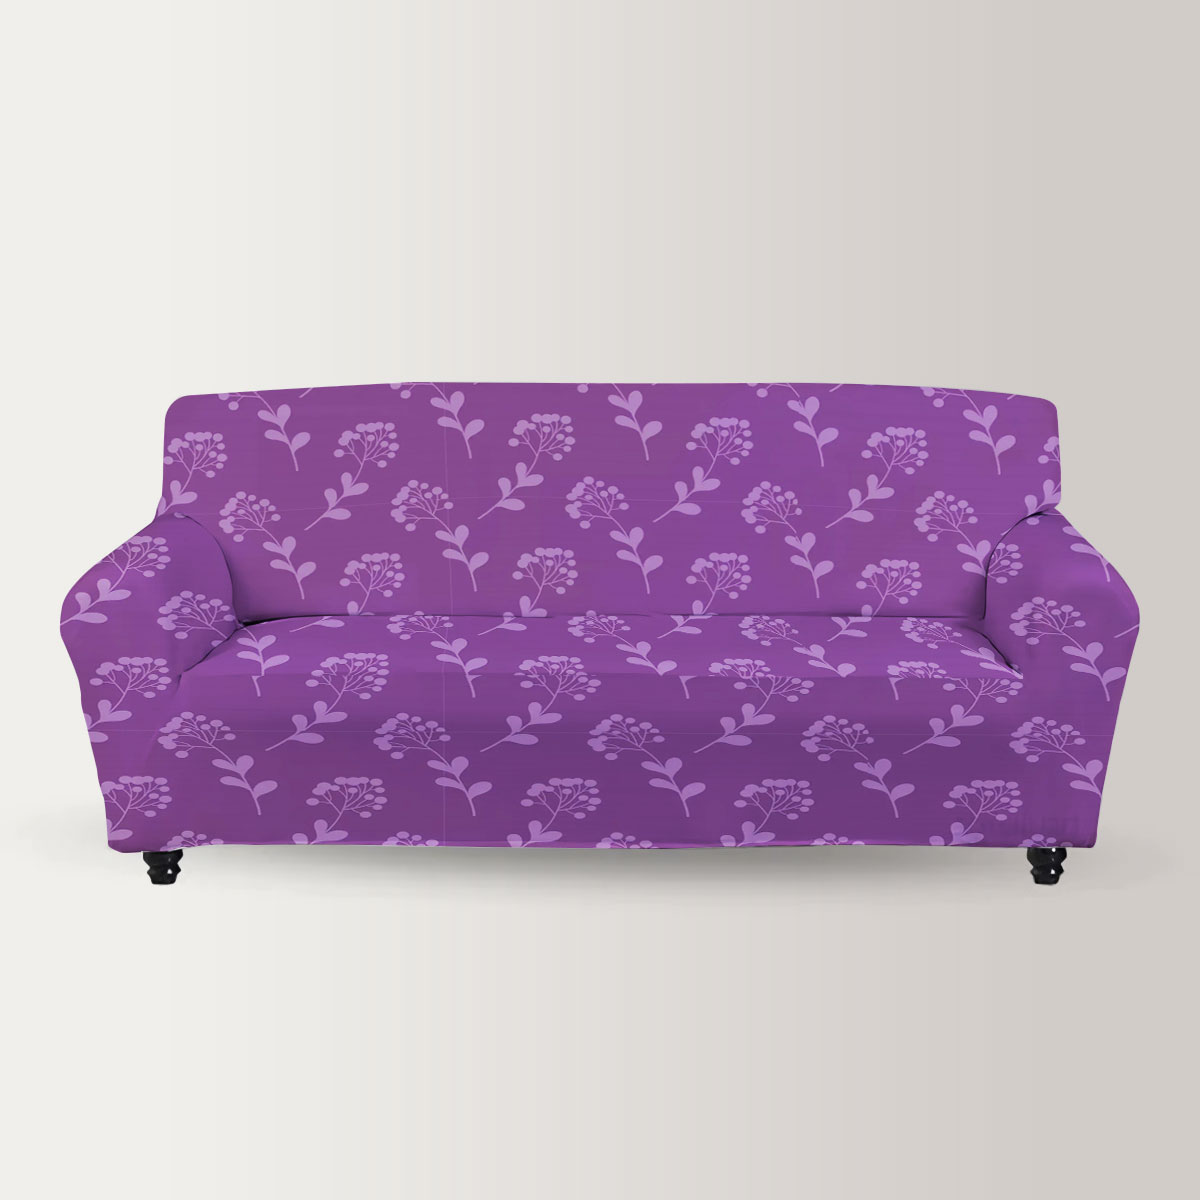 Violet Floral Seamless Pattern Sofa Cover